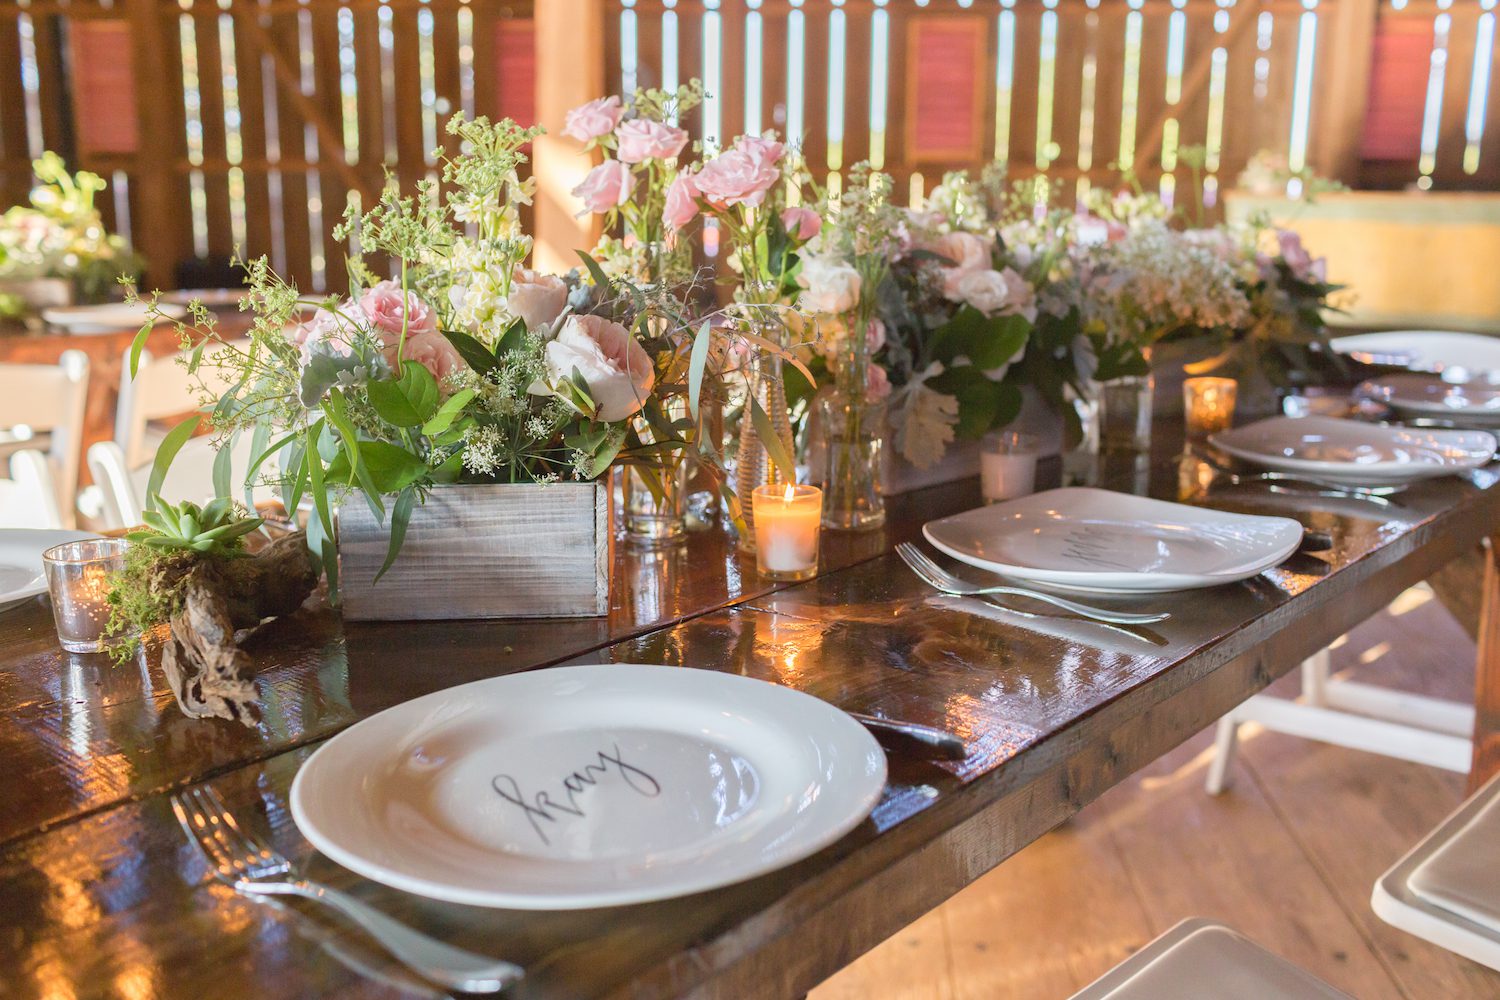 We will go over everything again, the number of guests, the number of tables, and the way each tablescape should look. Photography by Nicole Haun.